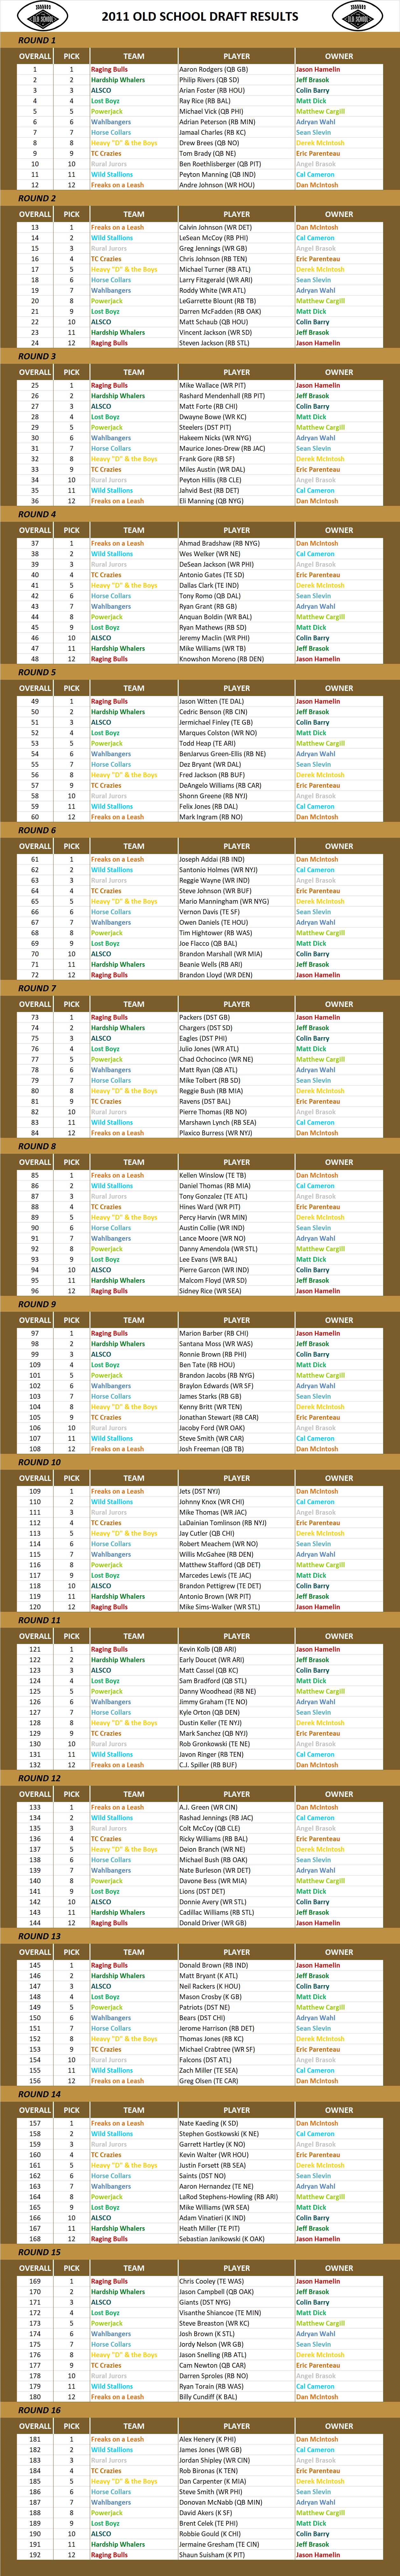 2011 National Football League Pool Draft Results